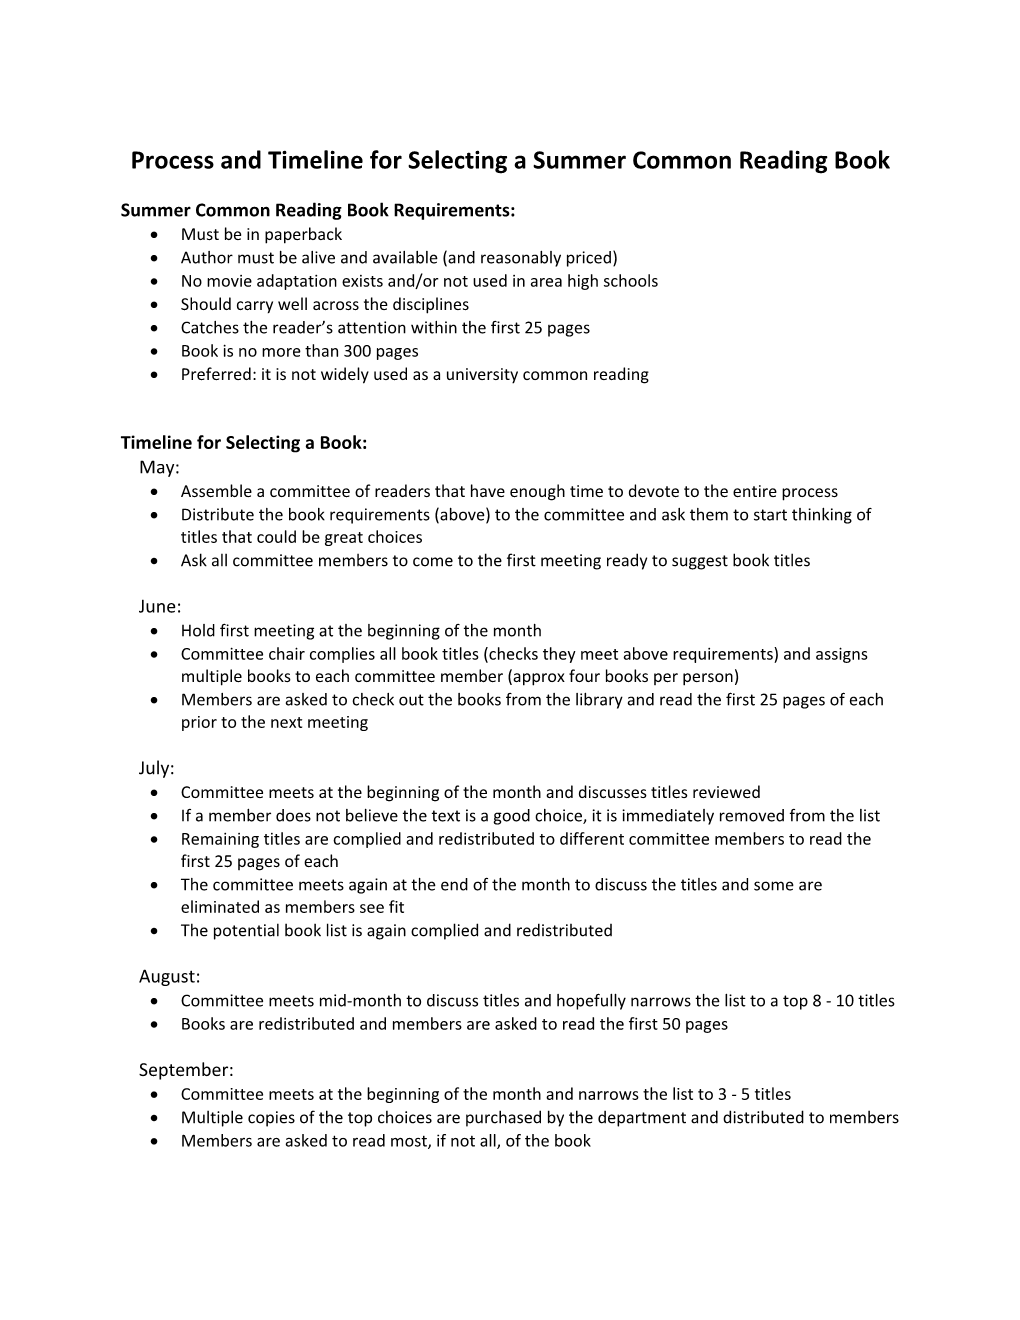 Process and Timeline for Selecting a Summer Common Reading Book